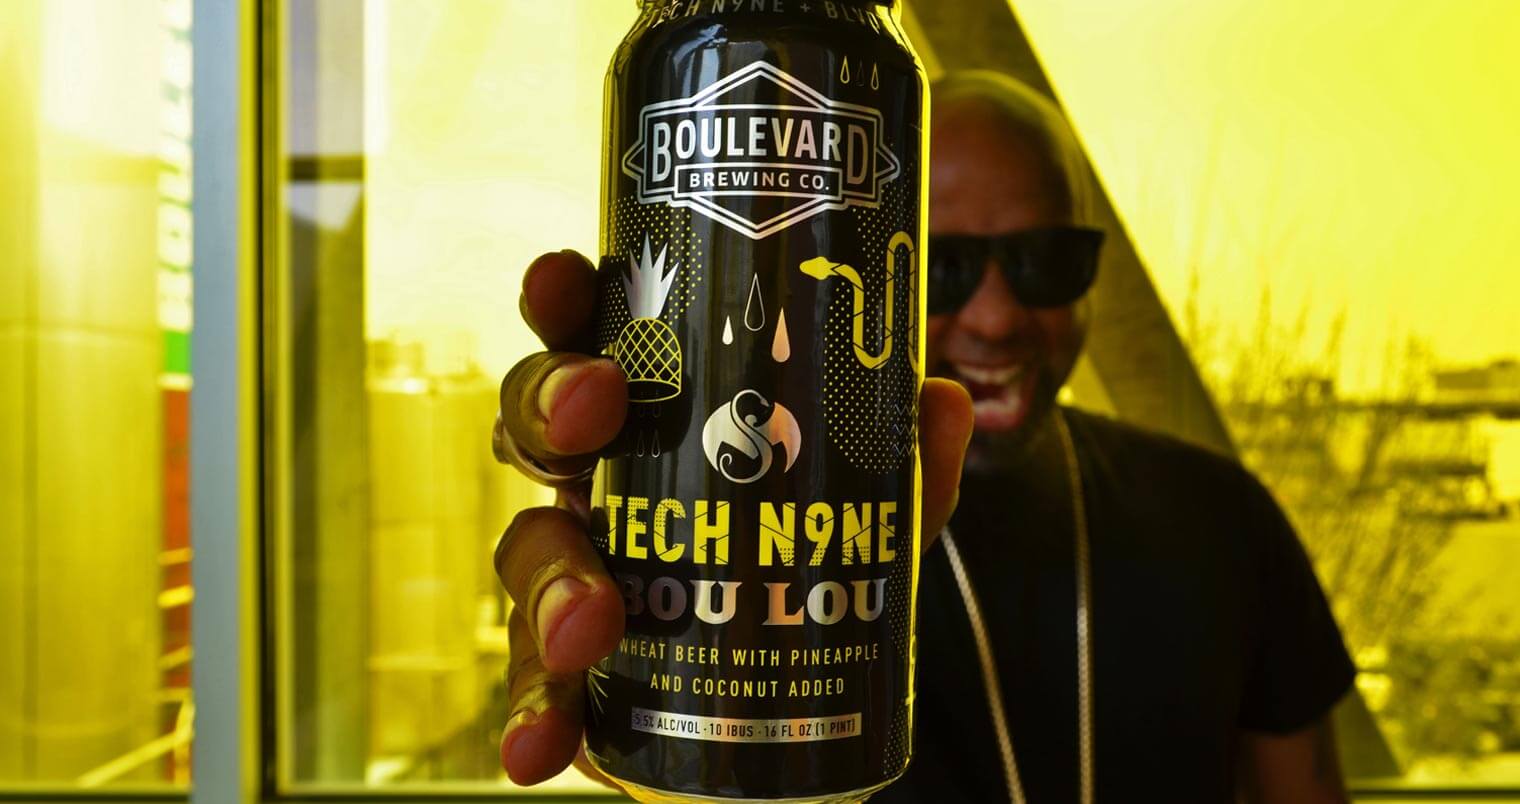 Boulevard Brewing's Collab with Tech N9ne Bou Lou, featured image